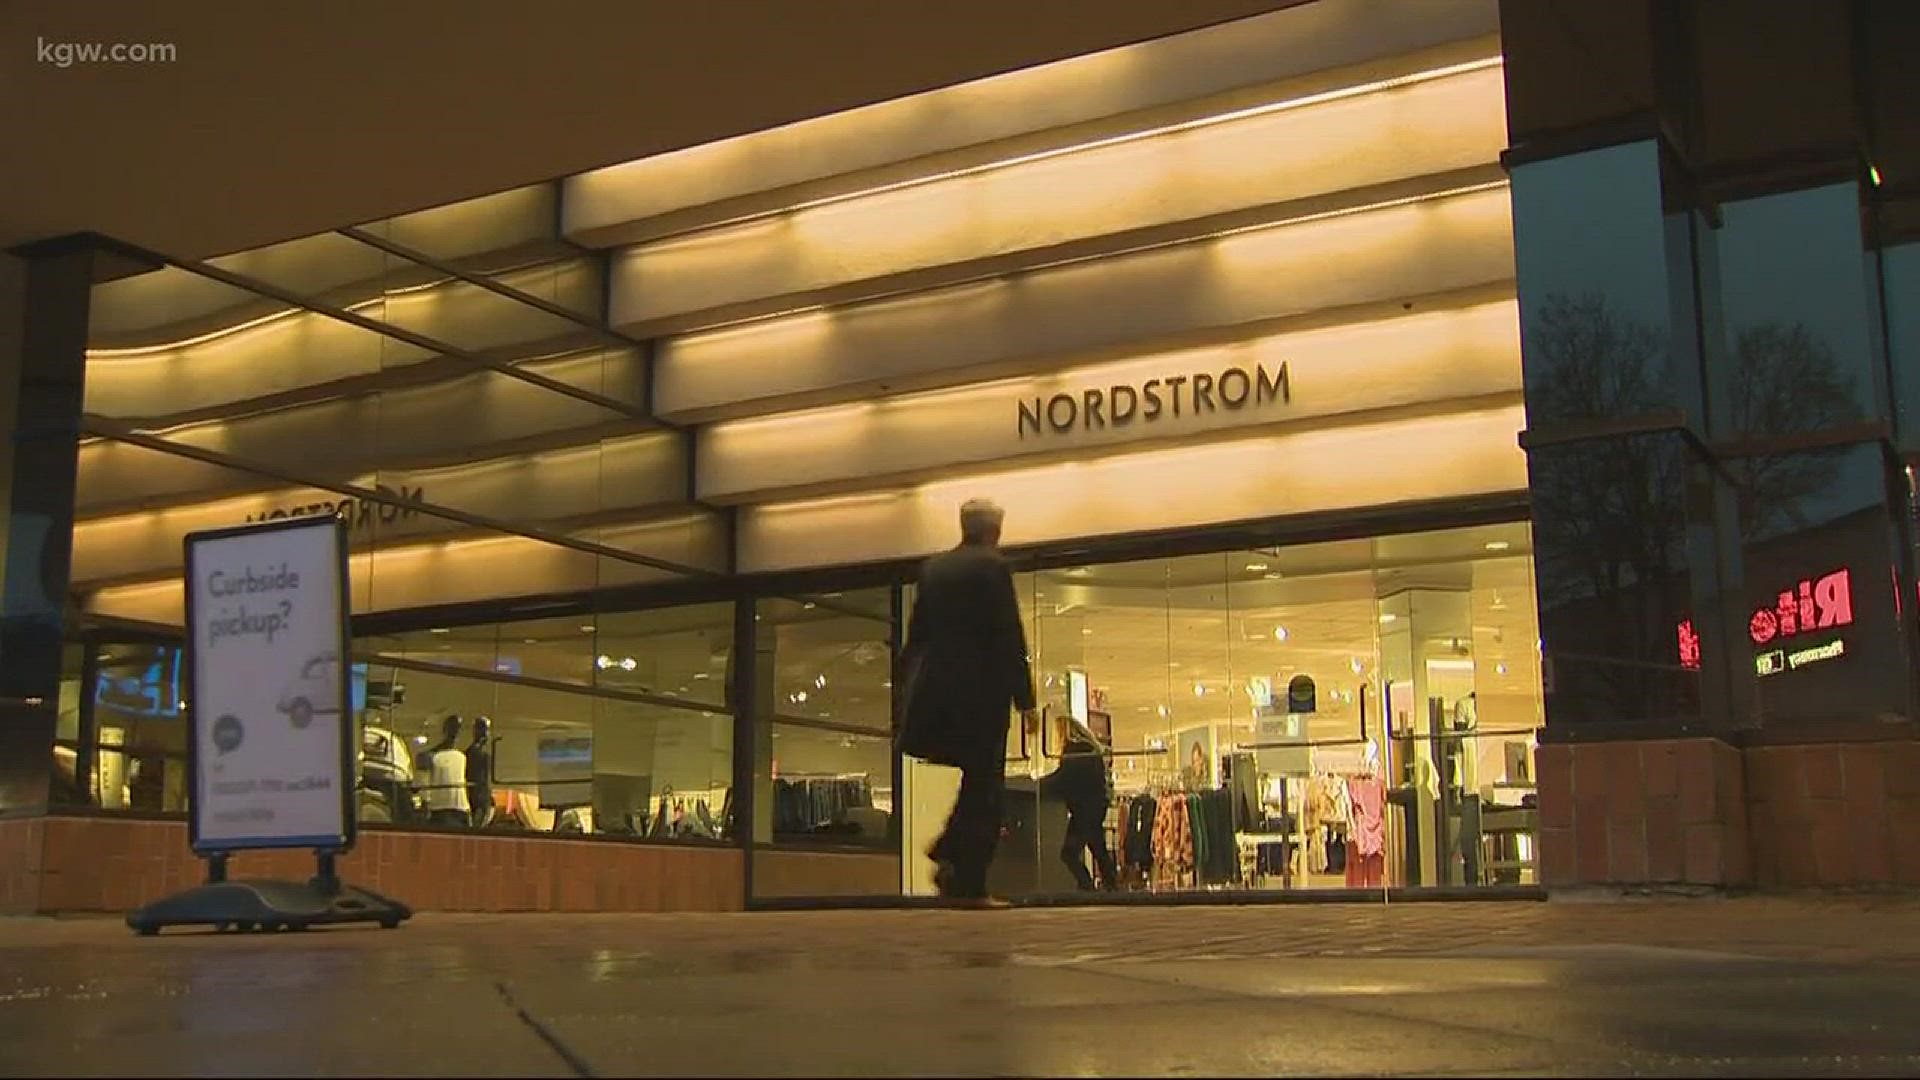 Kohl's, Nordstrom, and Others Could See Closures in 2023